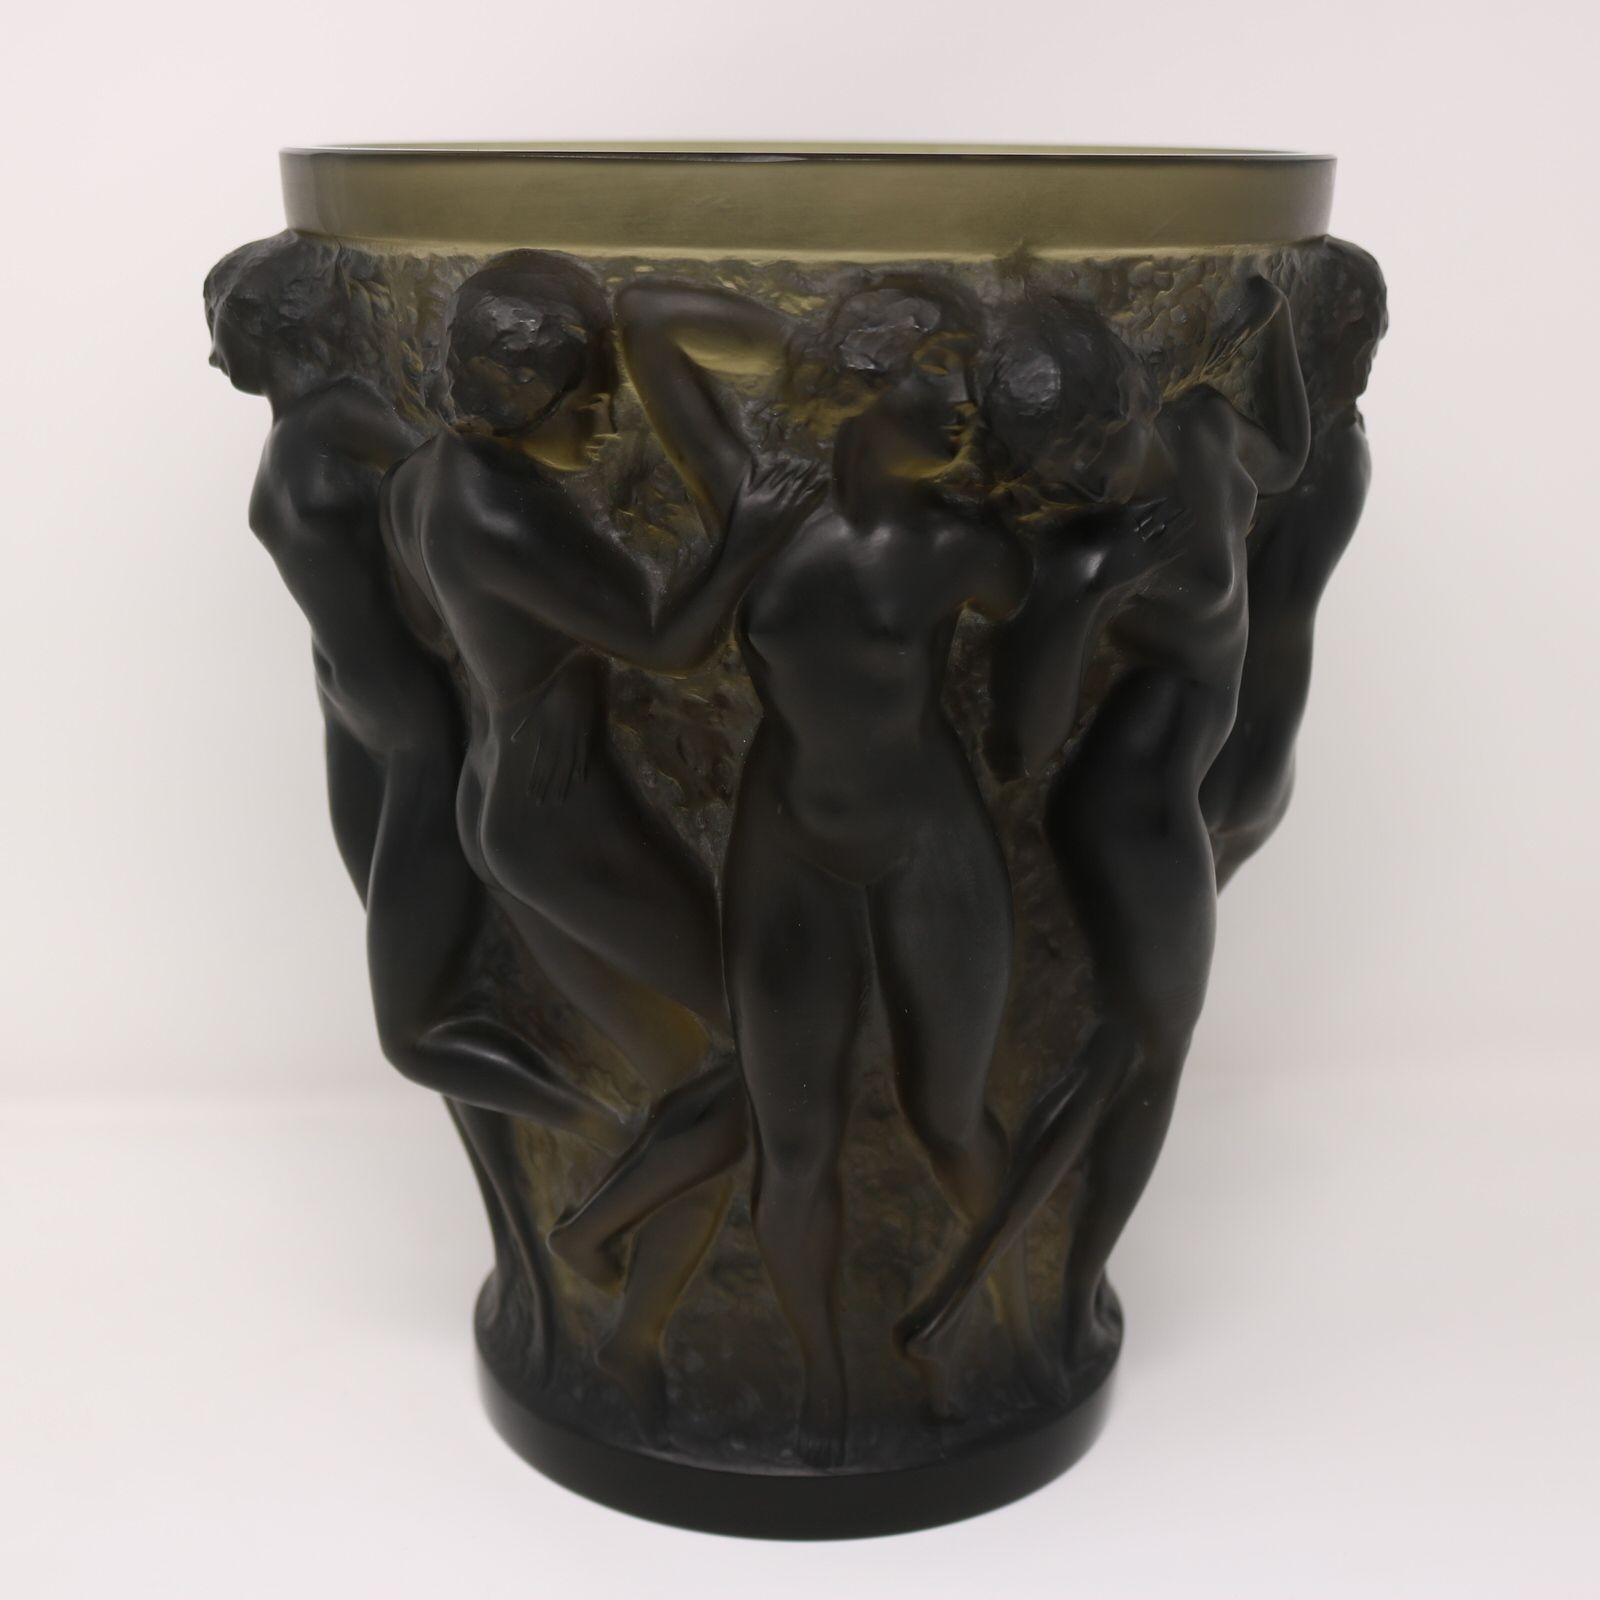 Rene Lalique Topaz glass Bacchantes vase. This pattern features ten dancing nude women in relief. The women represent Bacchantes from Greek mythology, who were a group of women who followed Dionysus on his travels. Wheel cut makers marks, 'R LALIQUE